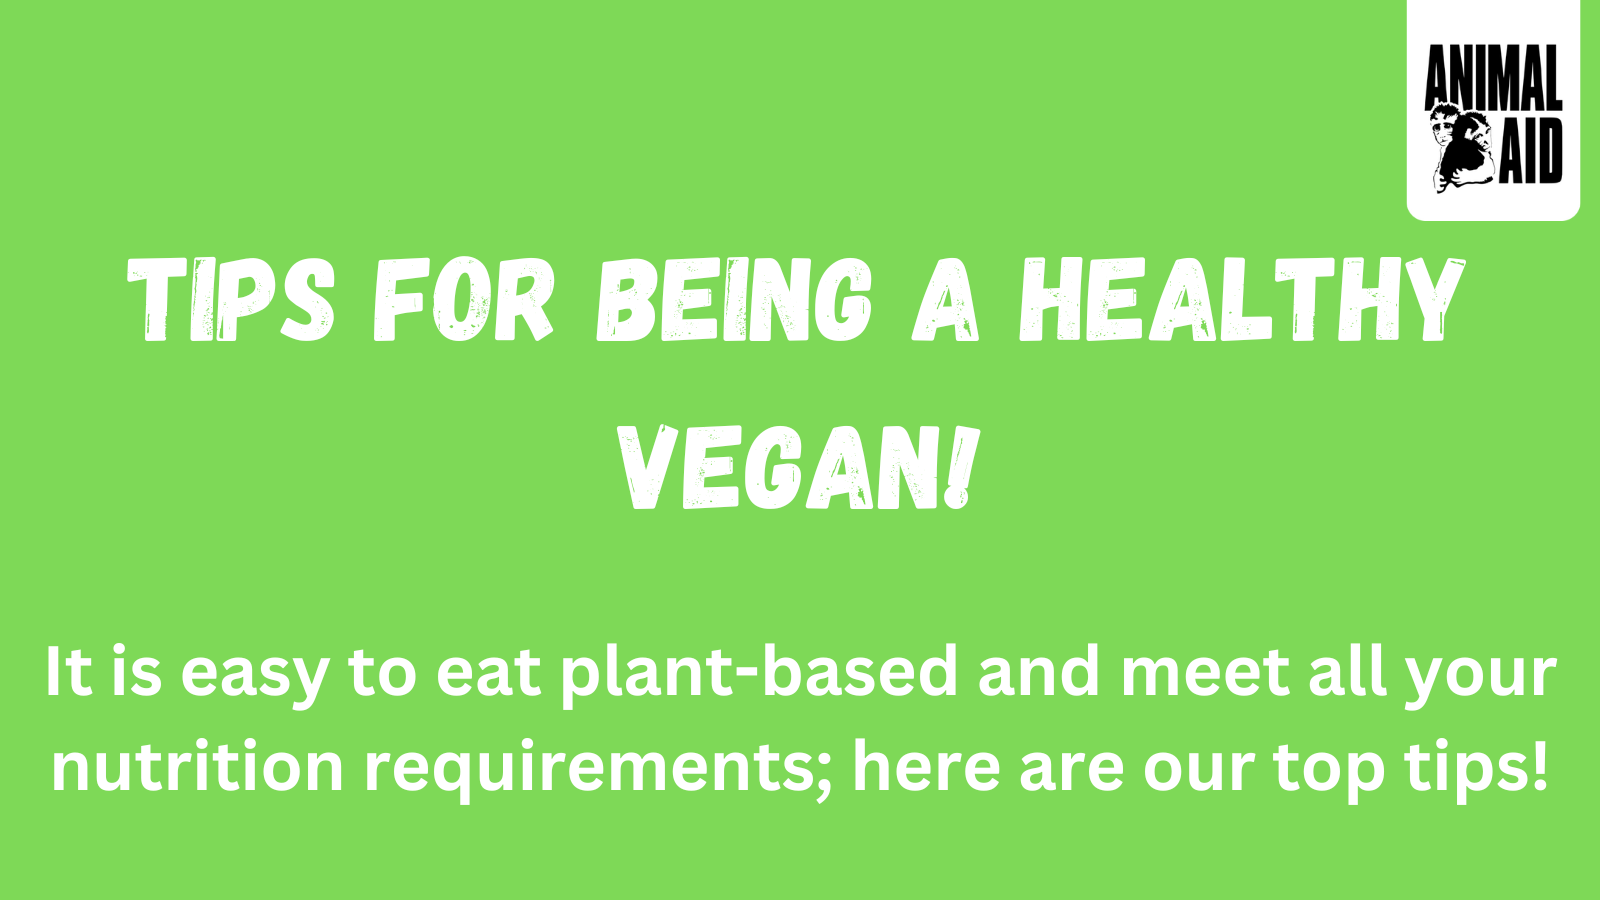 Helping to meet the nutritional needs of patients on a vegan diet